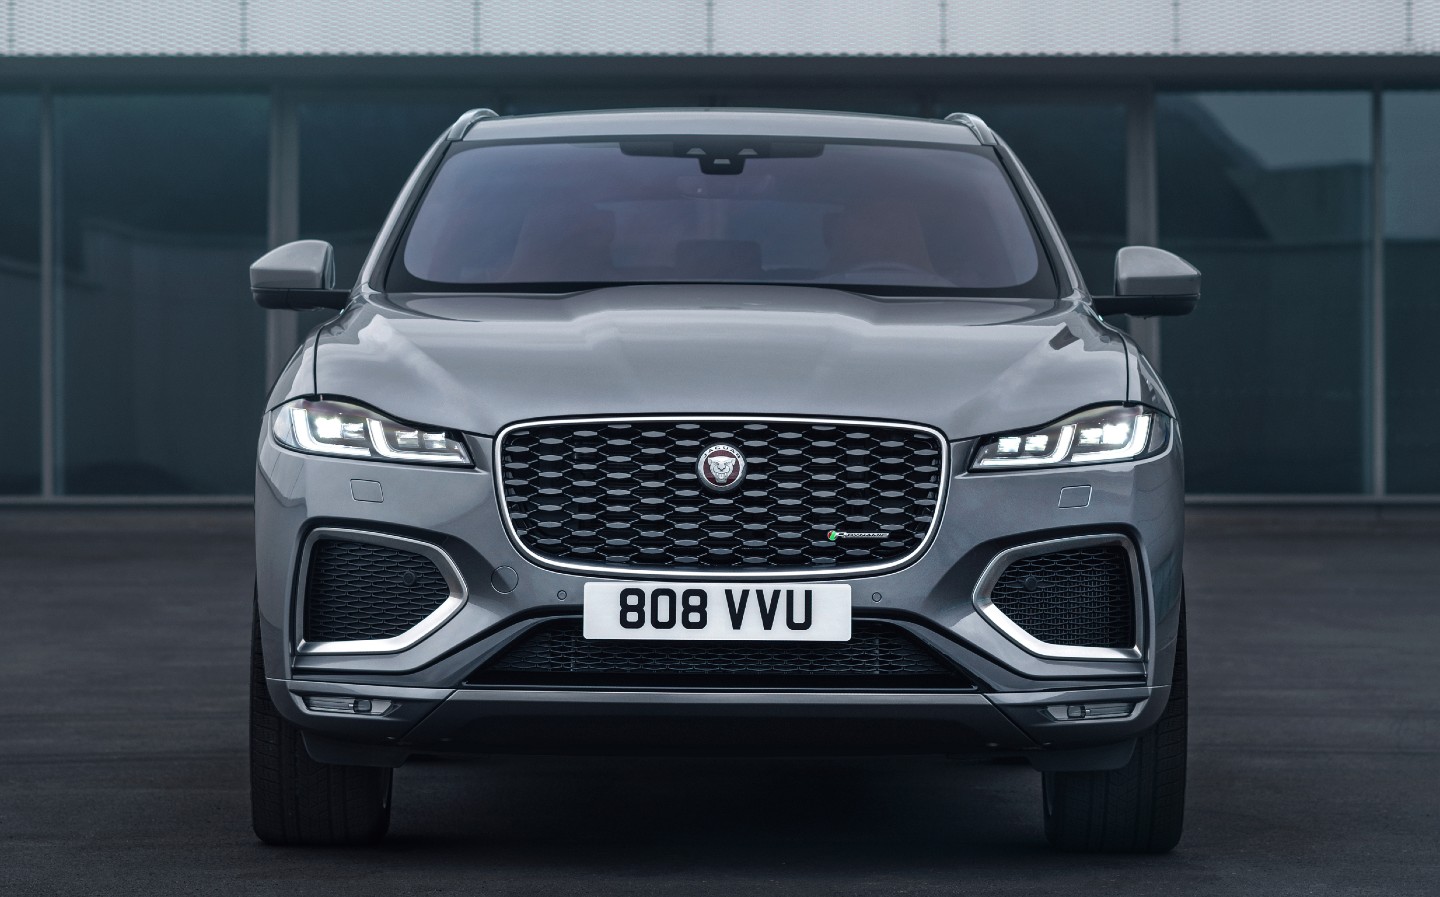 New Jaguar F-Pace 2021 review by Will Dron for Sunday Times Driving.co.uk